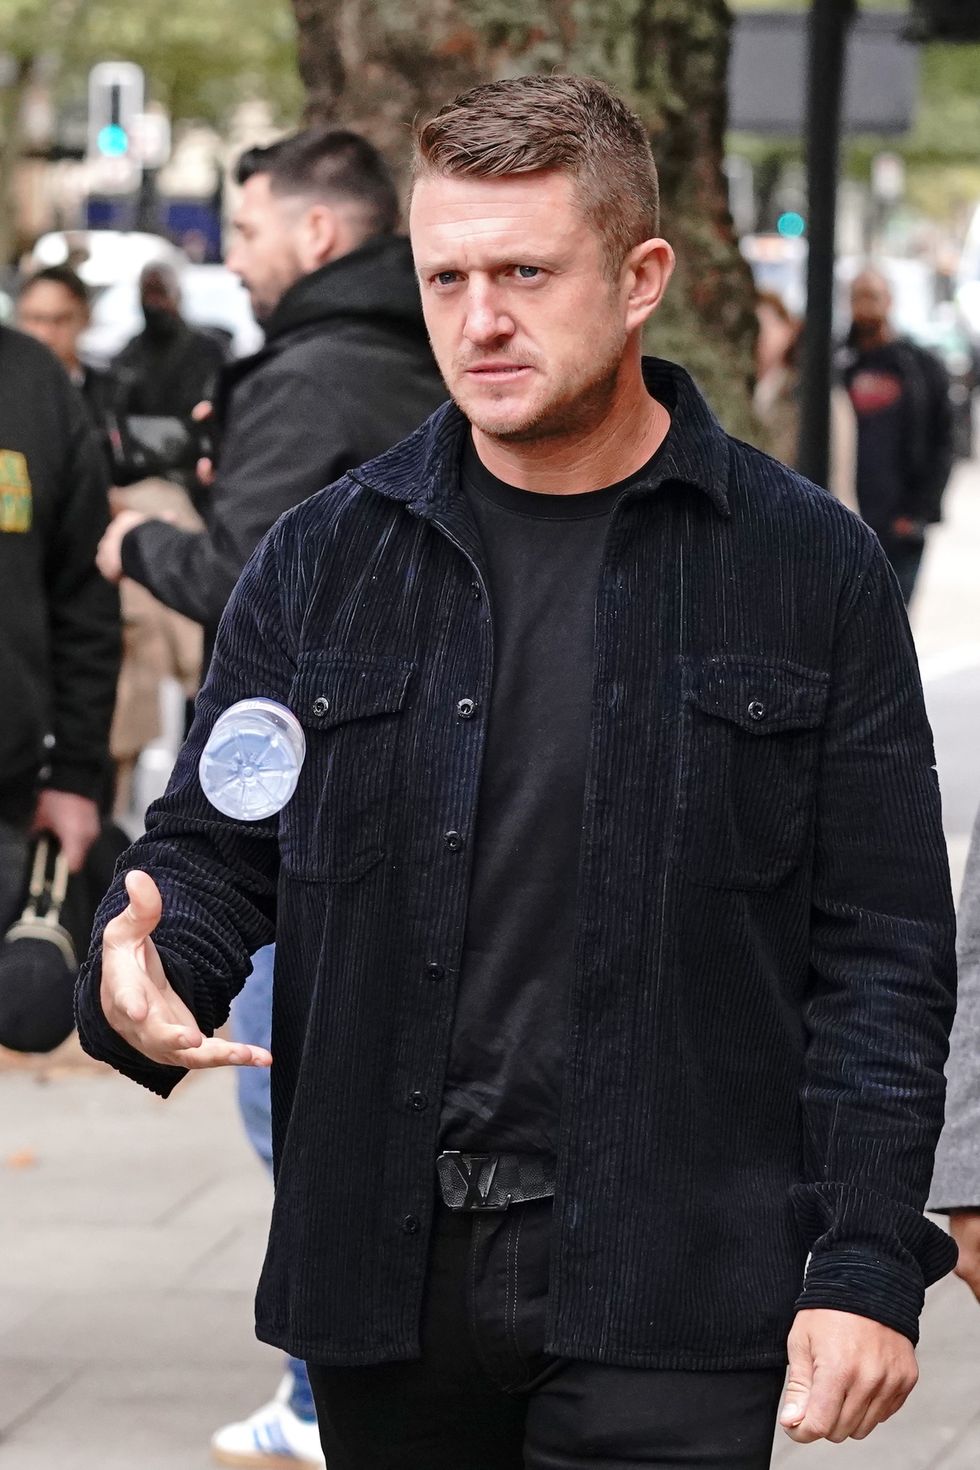 Tommy Robinson arrives at Westminster Magistrates' Court in London for a hearing regarding the stalking of a journalist. Picture date: Wednesday October 13, 2021.